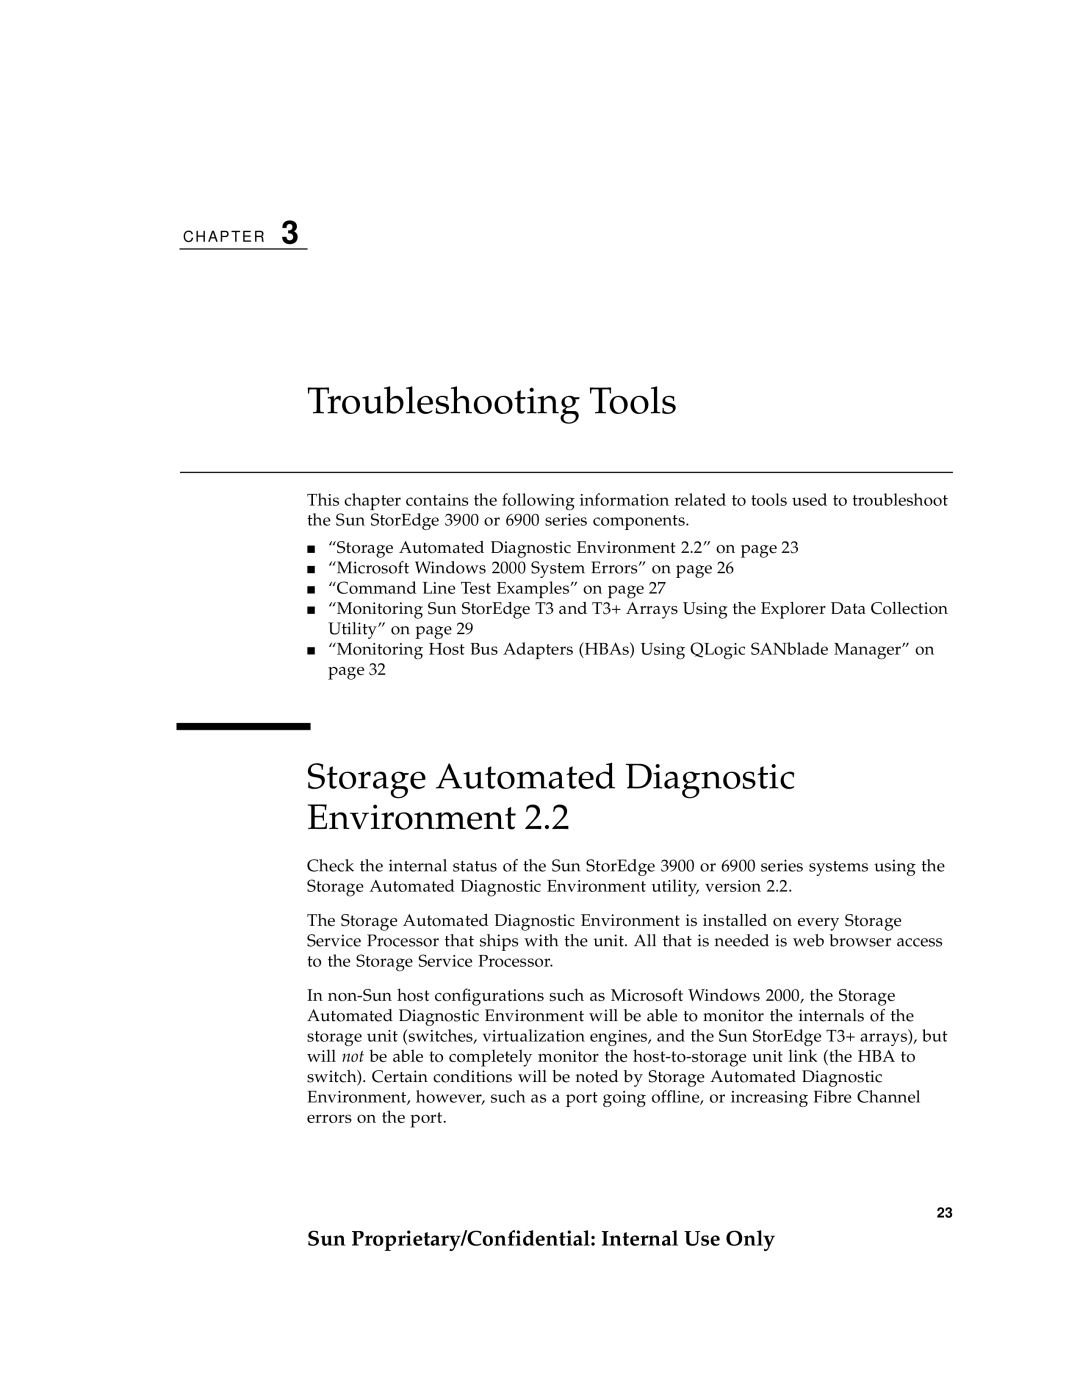 Sun Microsystems 6900, 3900 manual Troubleshooting Tools, Storage Automated Diagnostic Environment 